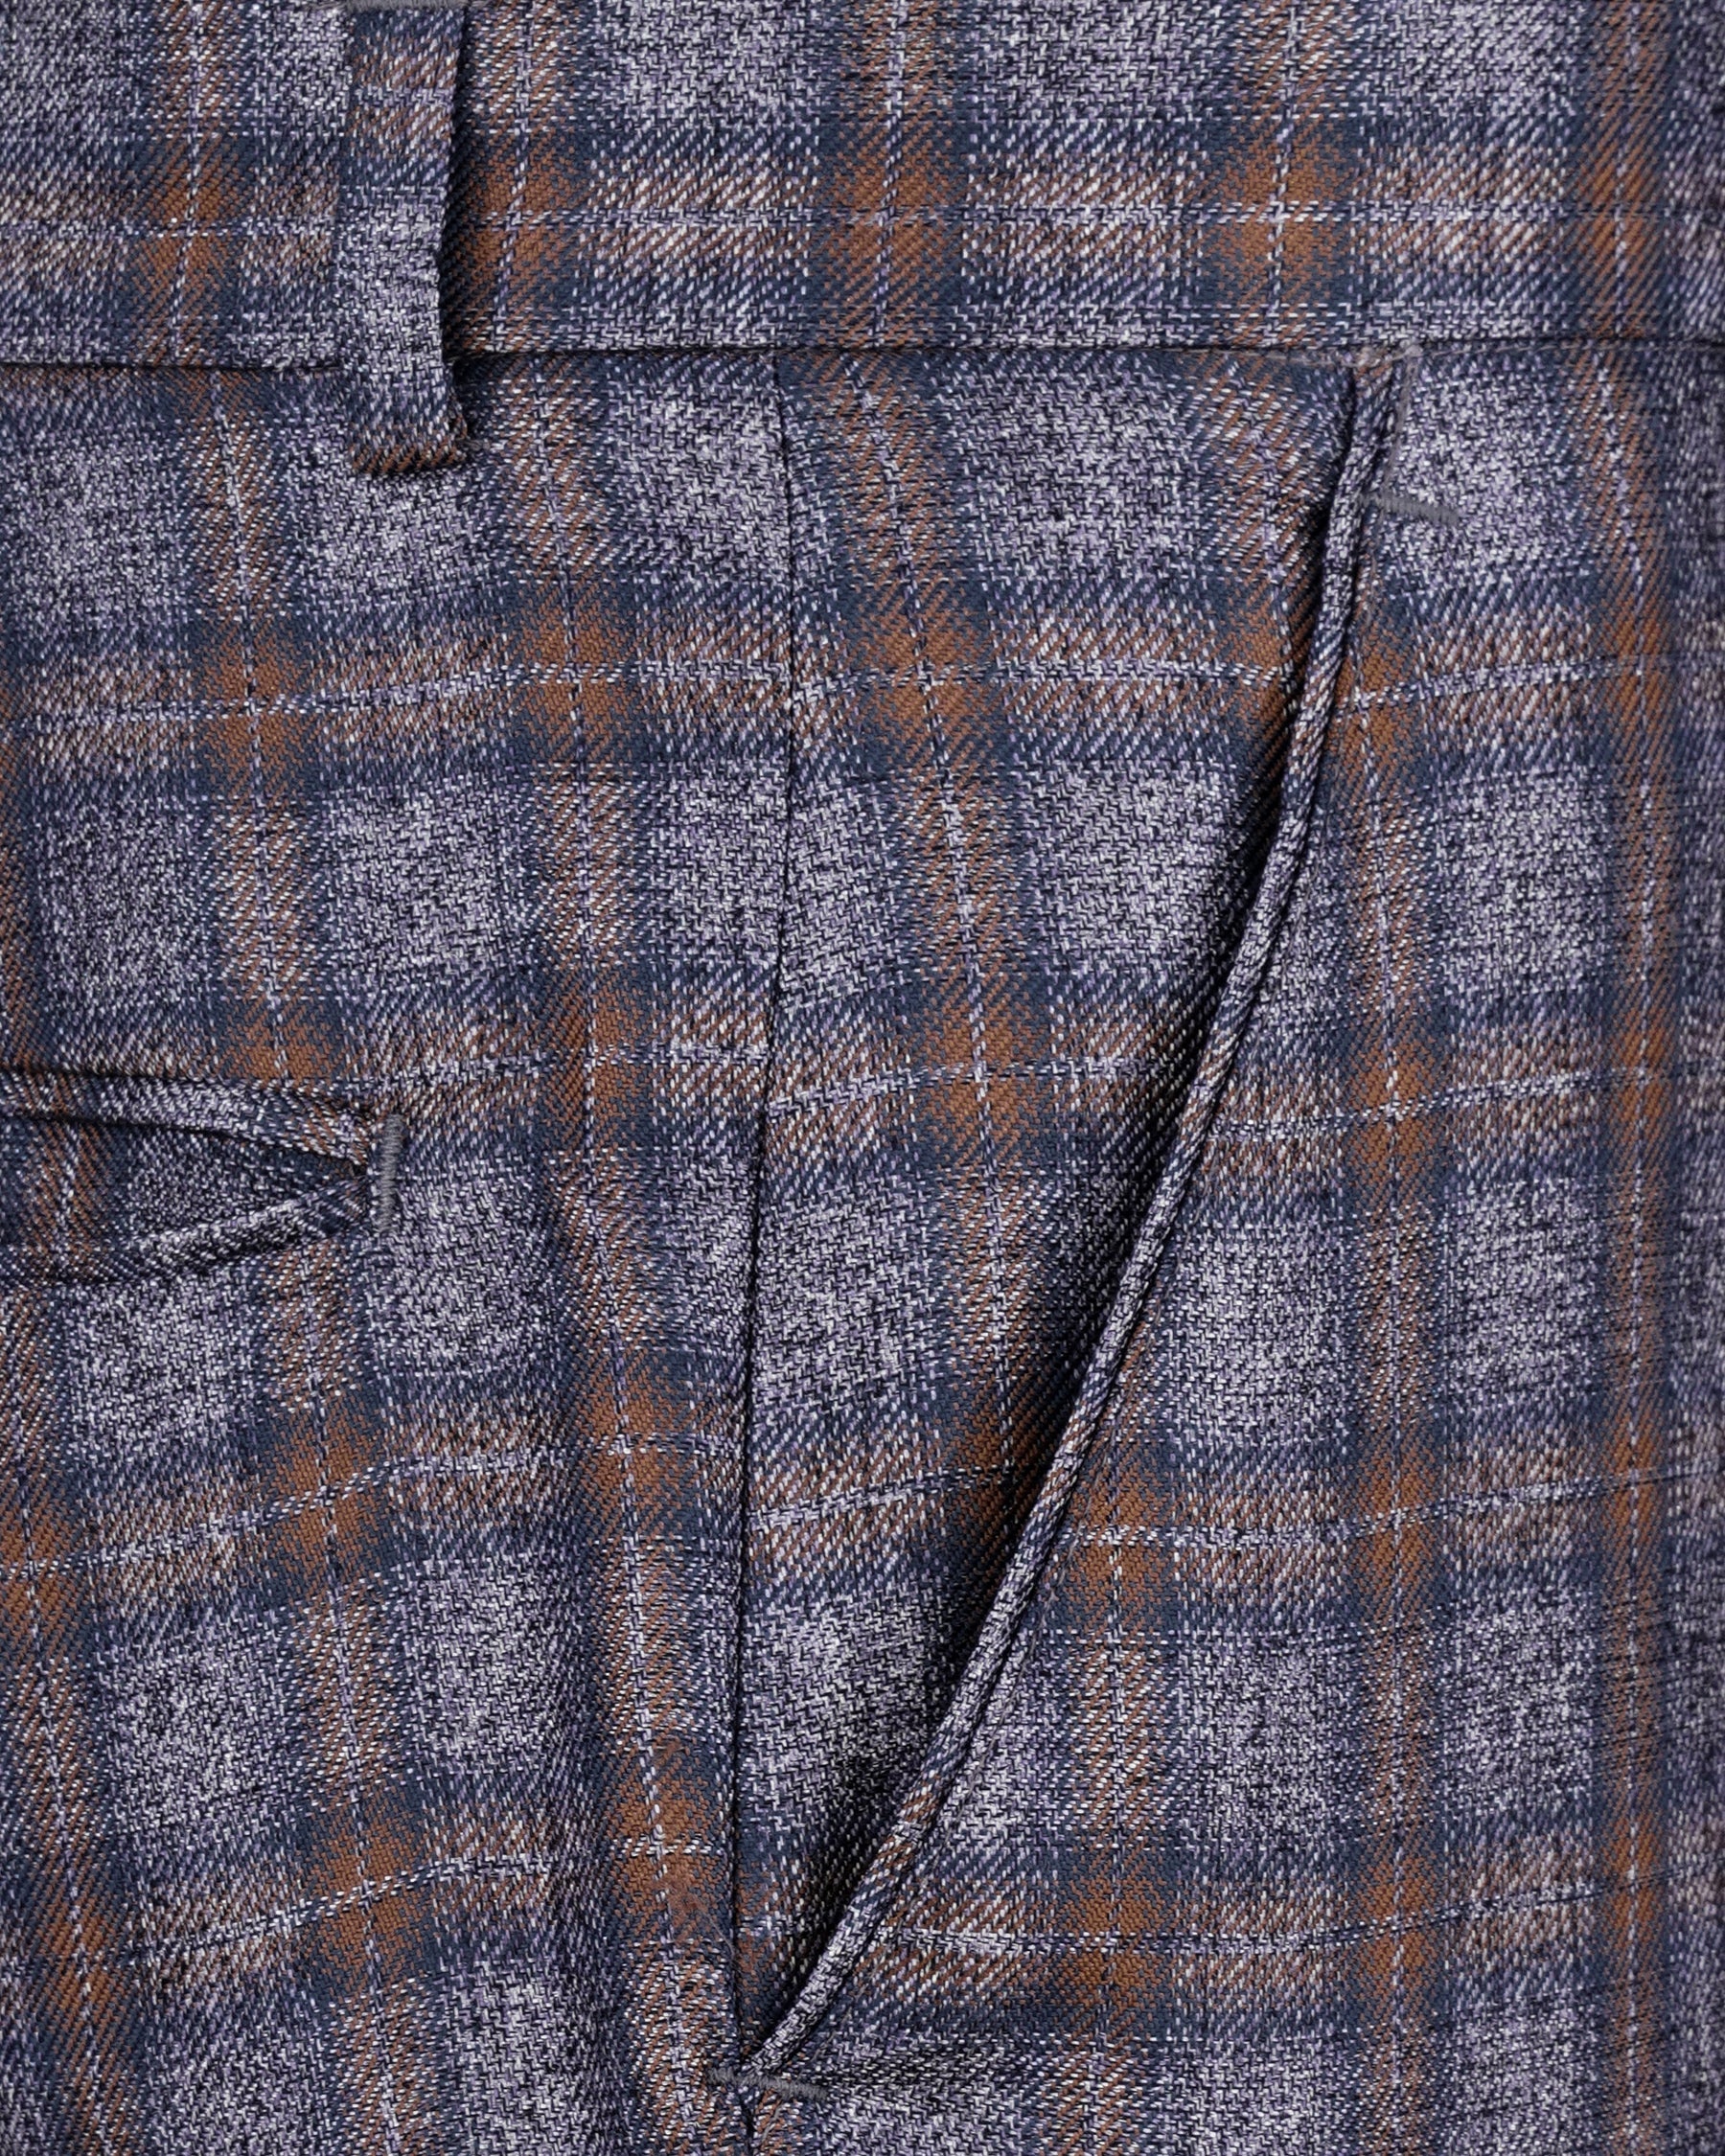 Martini Gray with Potters Brown Plaid Pant T2147-28, T2147-30, T2147-32, T2147-34, T2147-36, T2147-38, T2147-40, T2147-42, T2147-44
